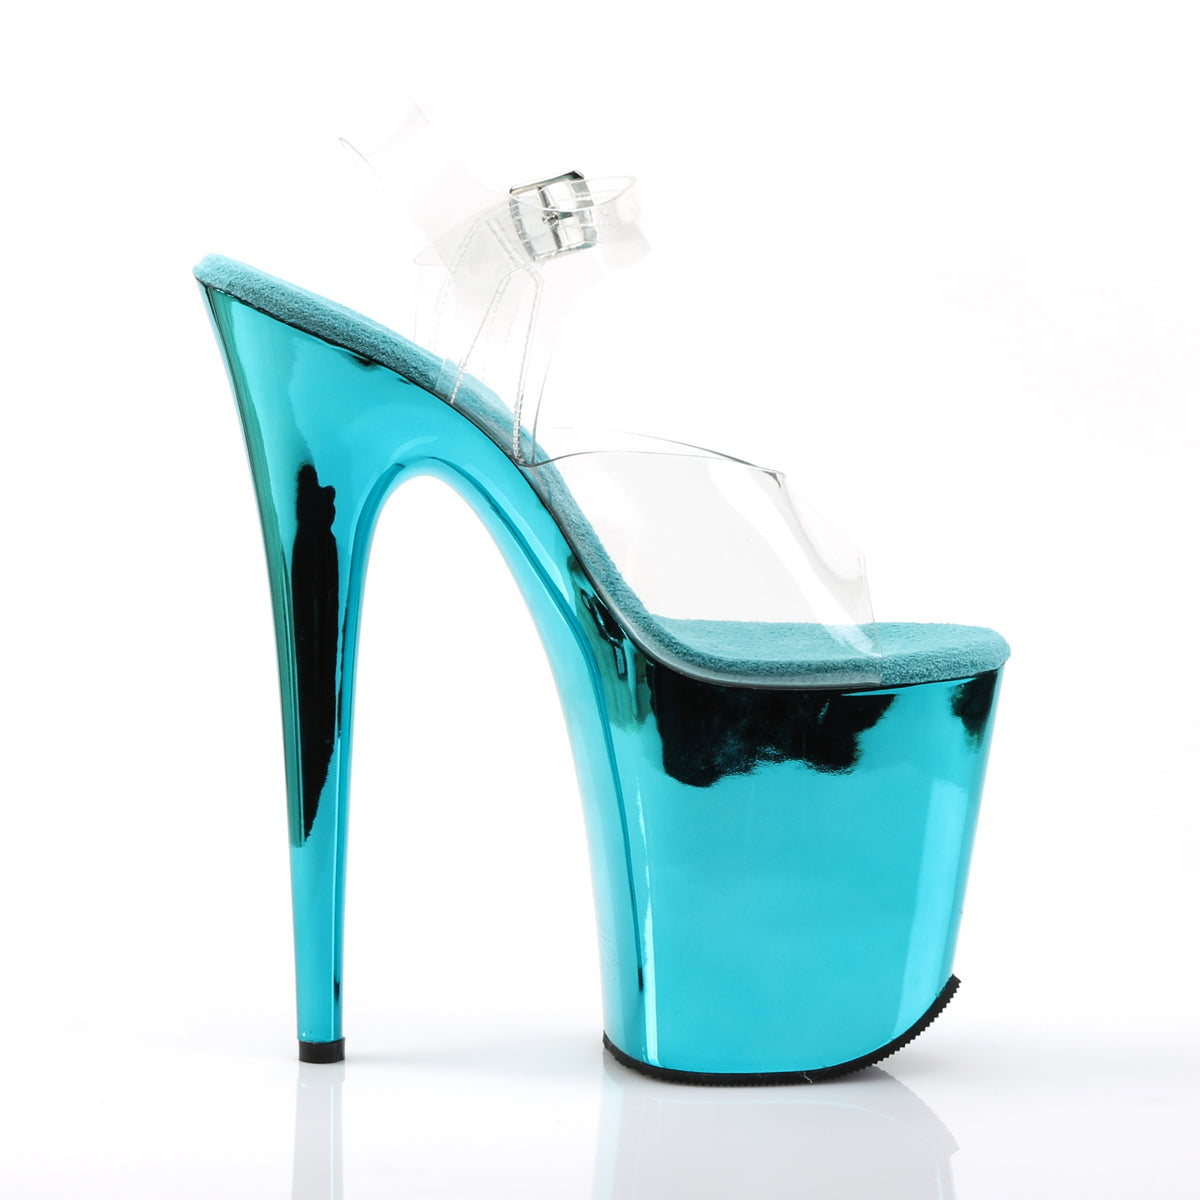 FLAMINGO-808 Pleaser 8" Heel Clear Turquoise Strippers Shoes-Pleaser- Sexy Shoes Fetish Heels